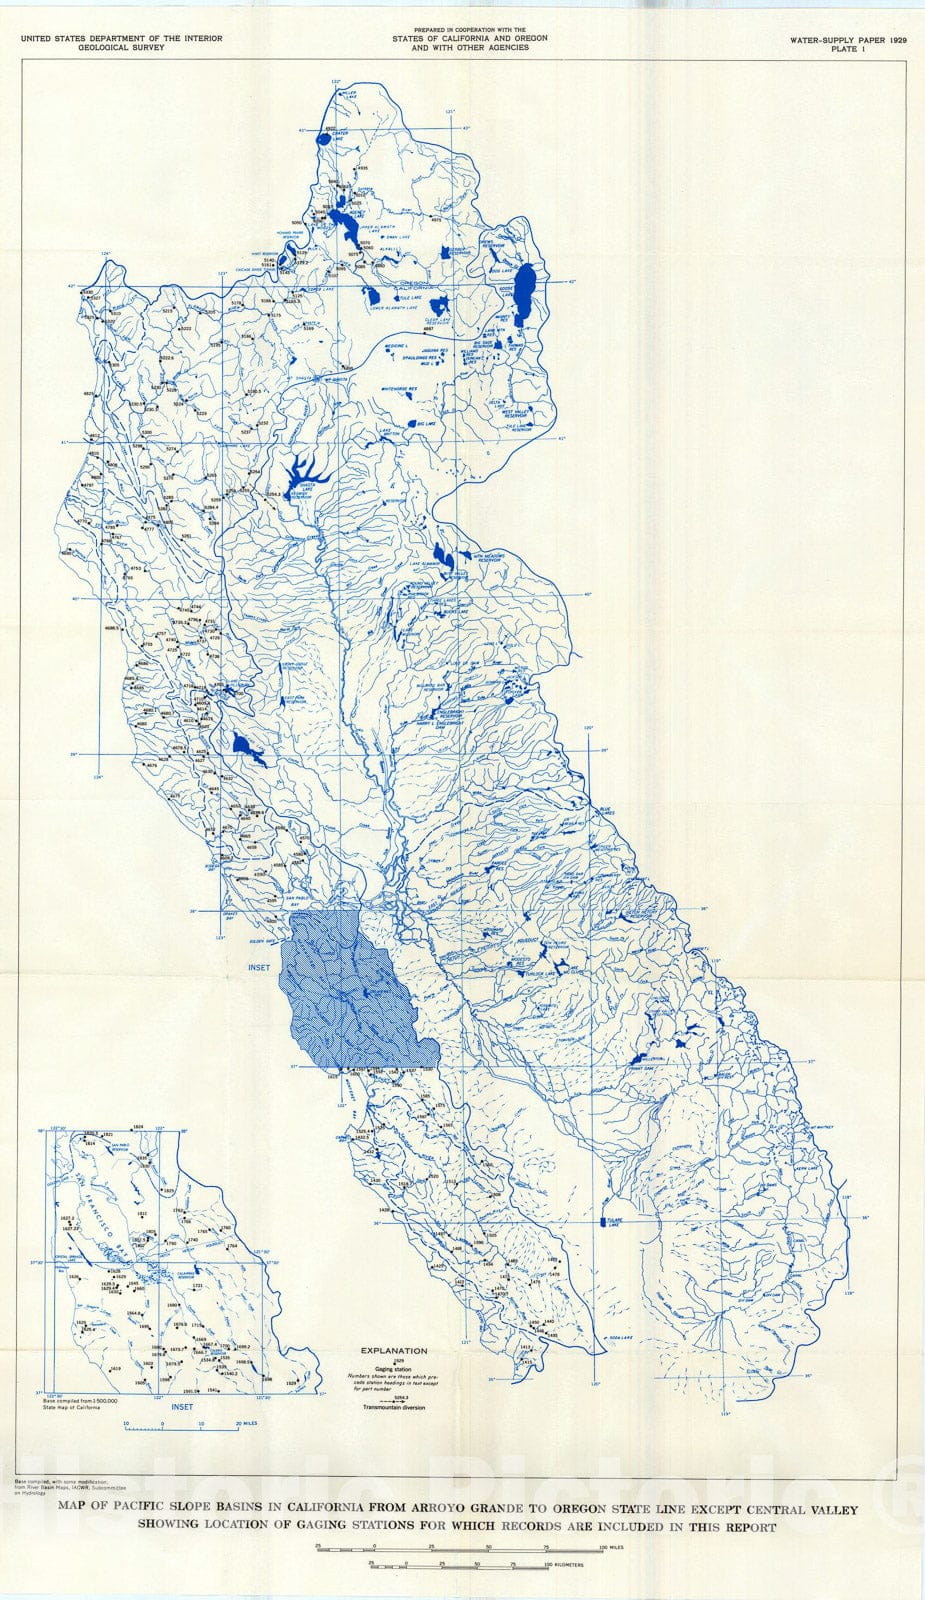 Map : Surface water supply of the United States, 1961-65, Part 11. Pacific slope basins in California, Volume 2. basins from Arroyo Gran, 1970 Cartography Wall Art :